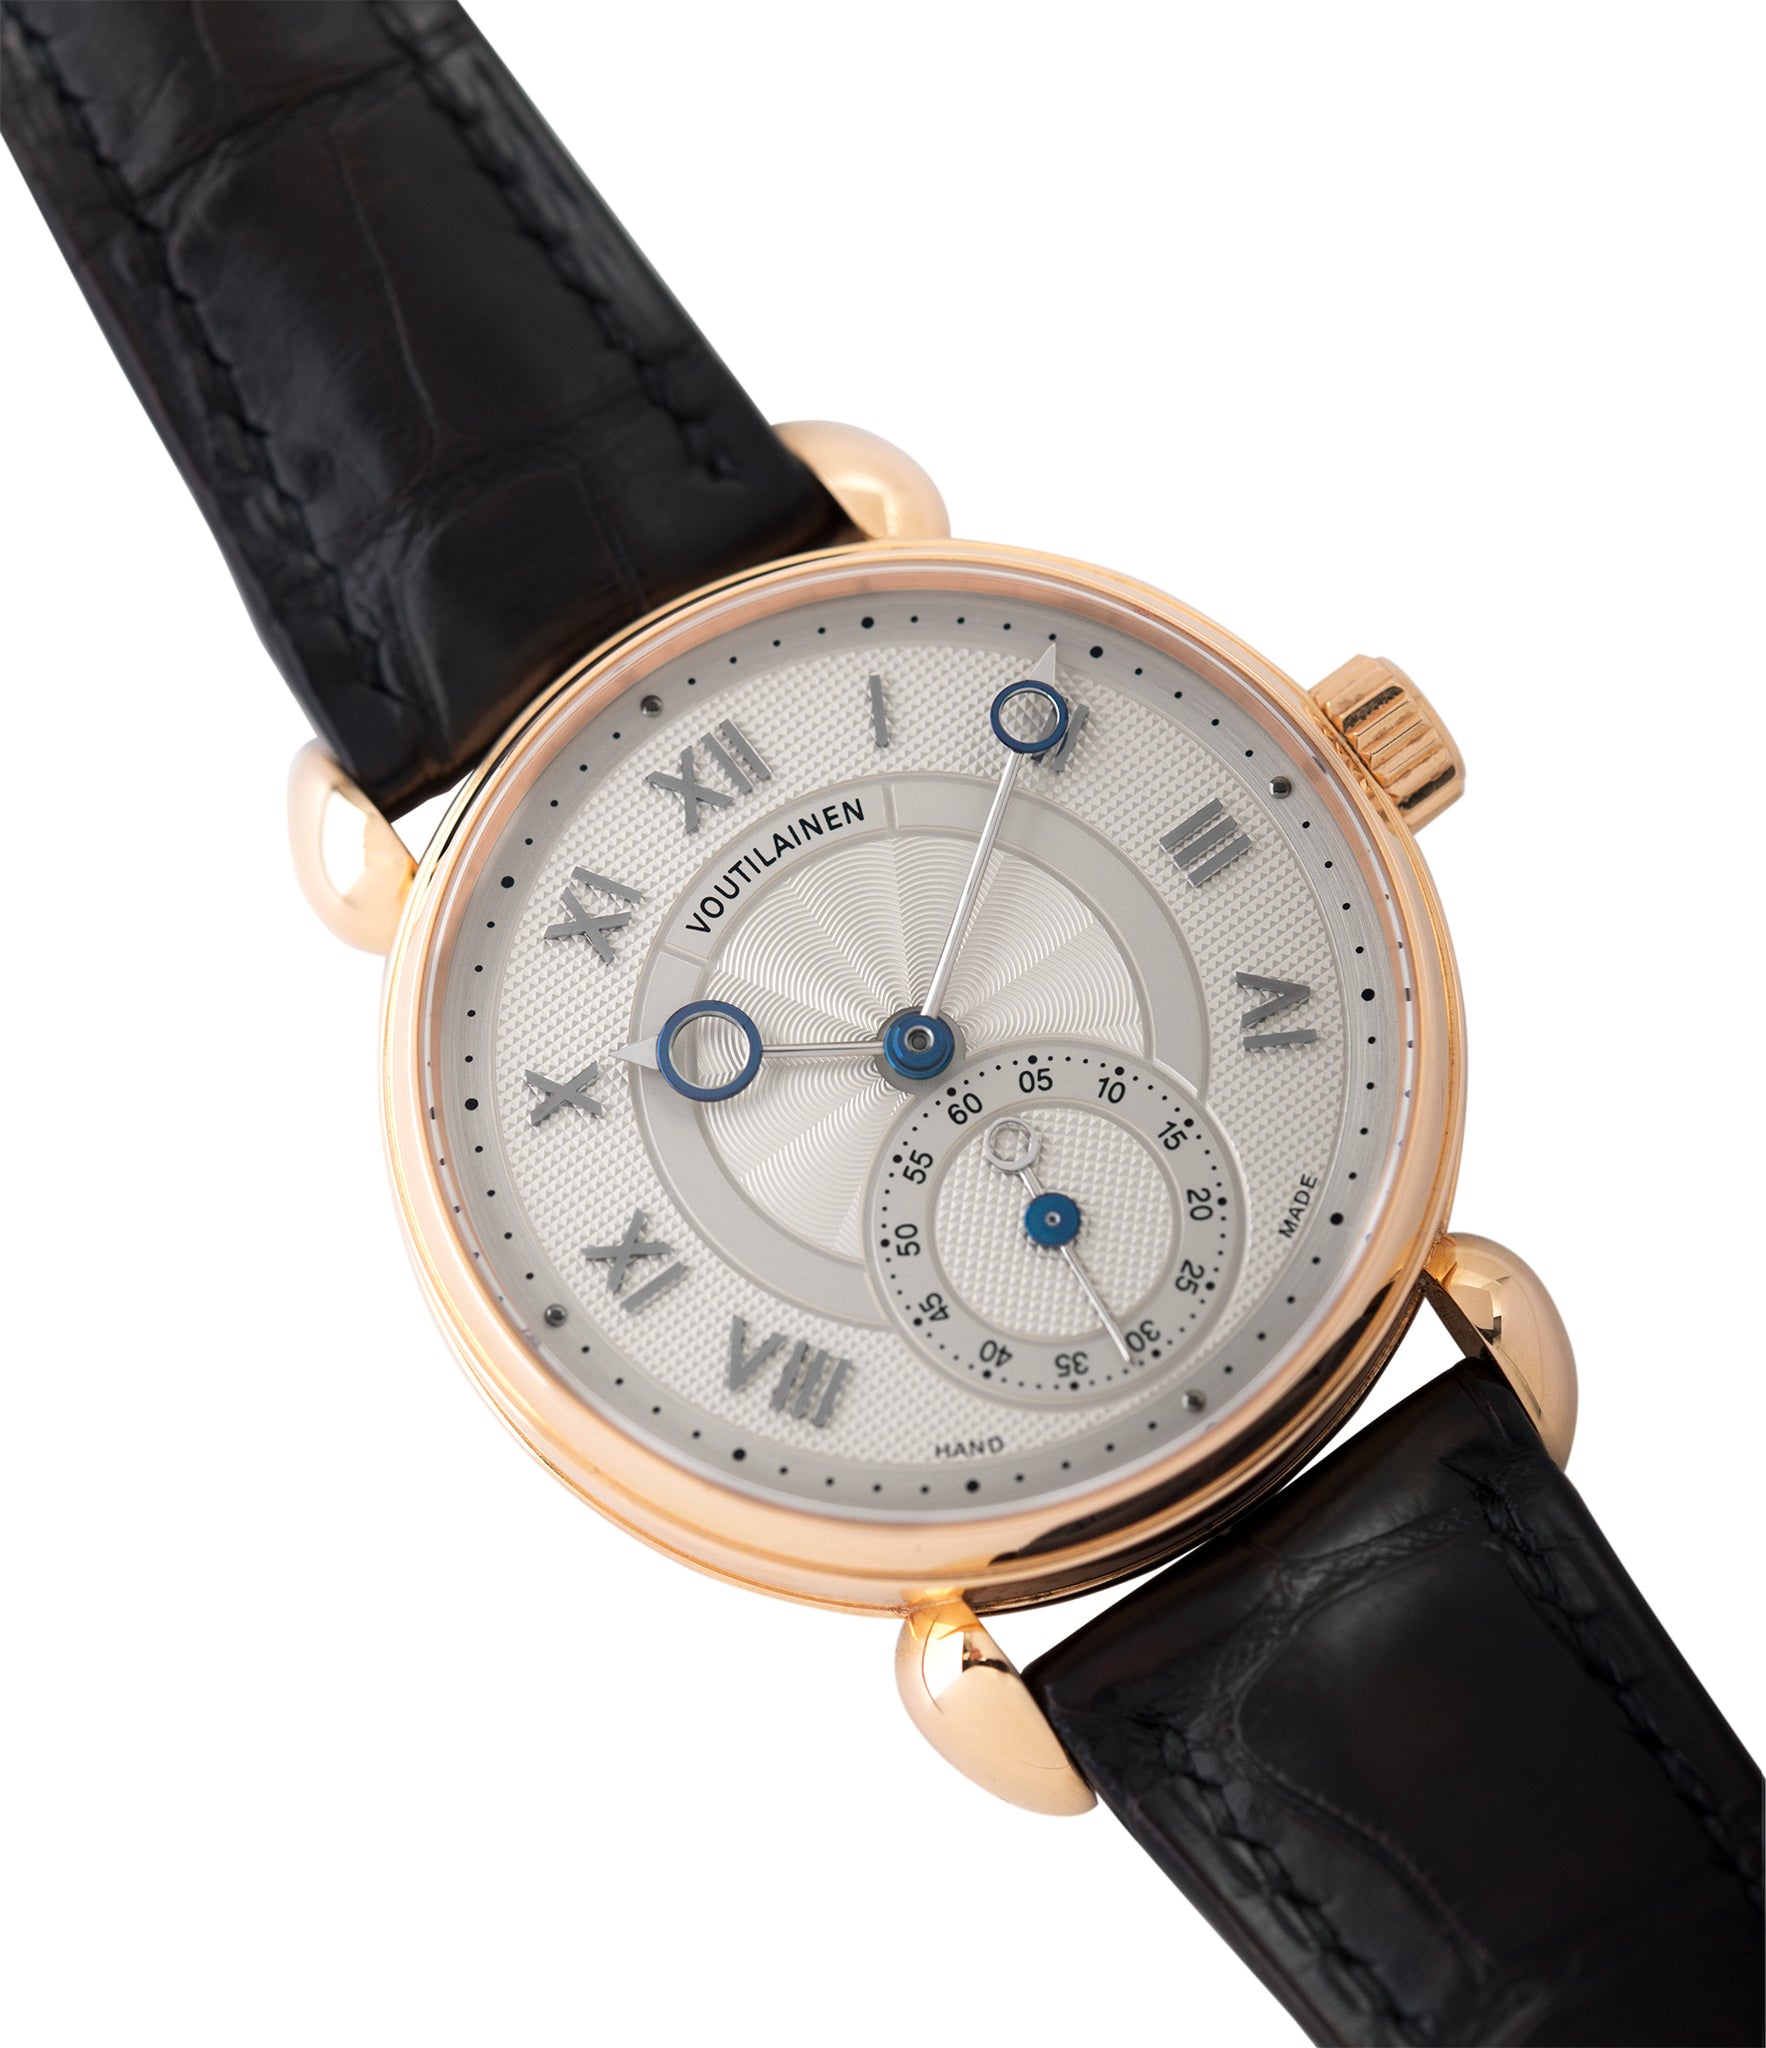 sell Voutilainen Observatoire Limited Edition rose gold rare dress watch for sale online at A Collected Man London endorsed seller of independent watchmaker